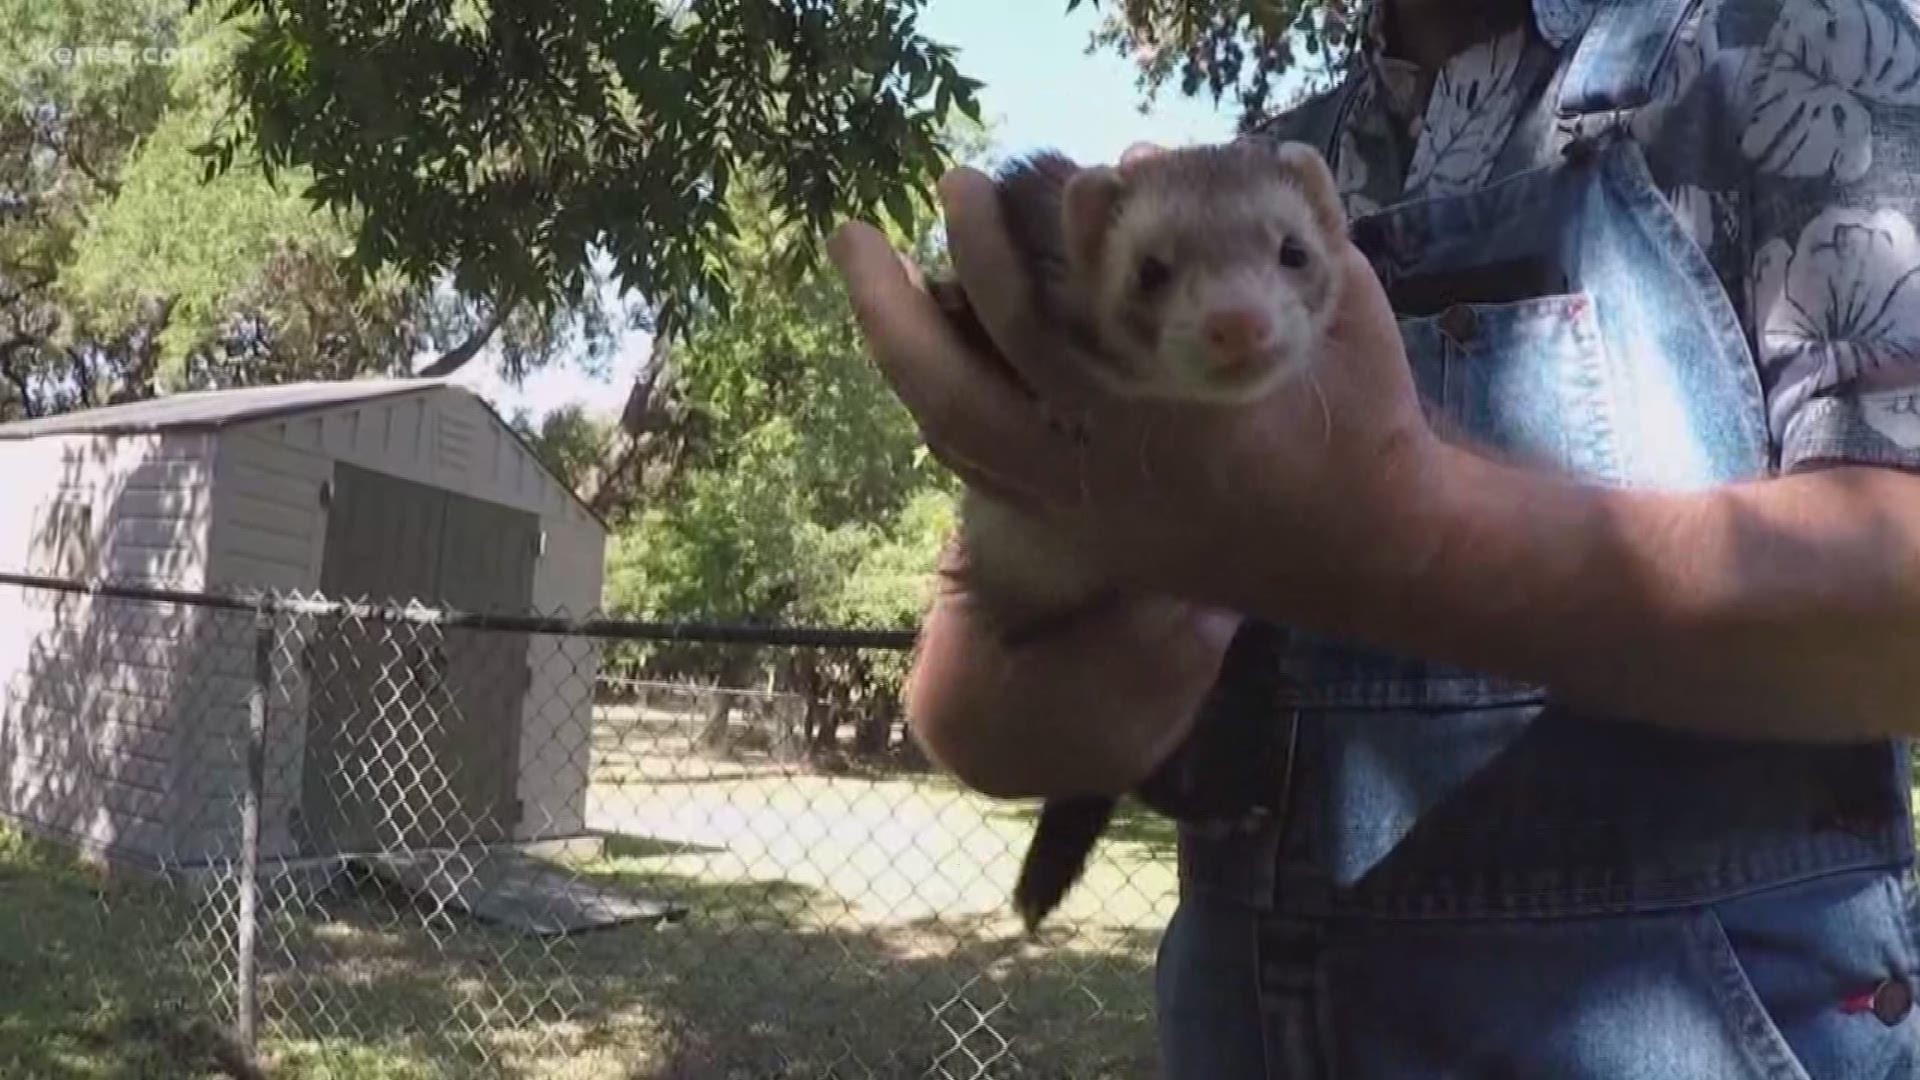 Most of us would do anything to protect our pets. But police in Boerne, Texas say one man's actions went too far to save his emotional support ferret on the run.